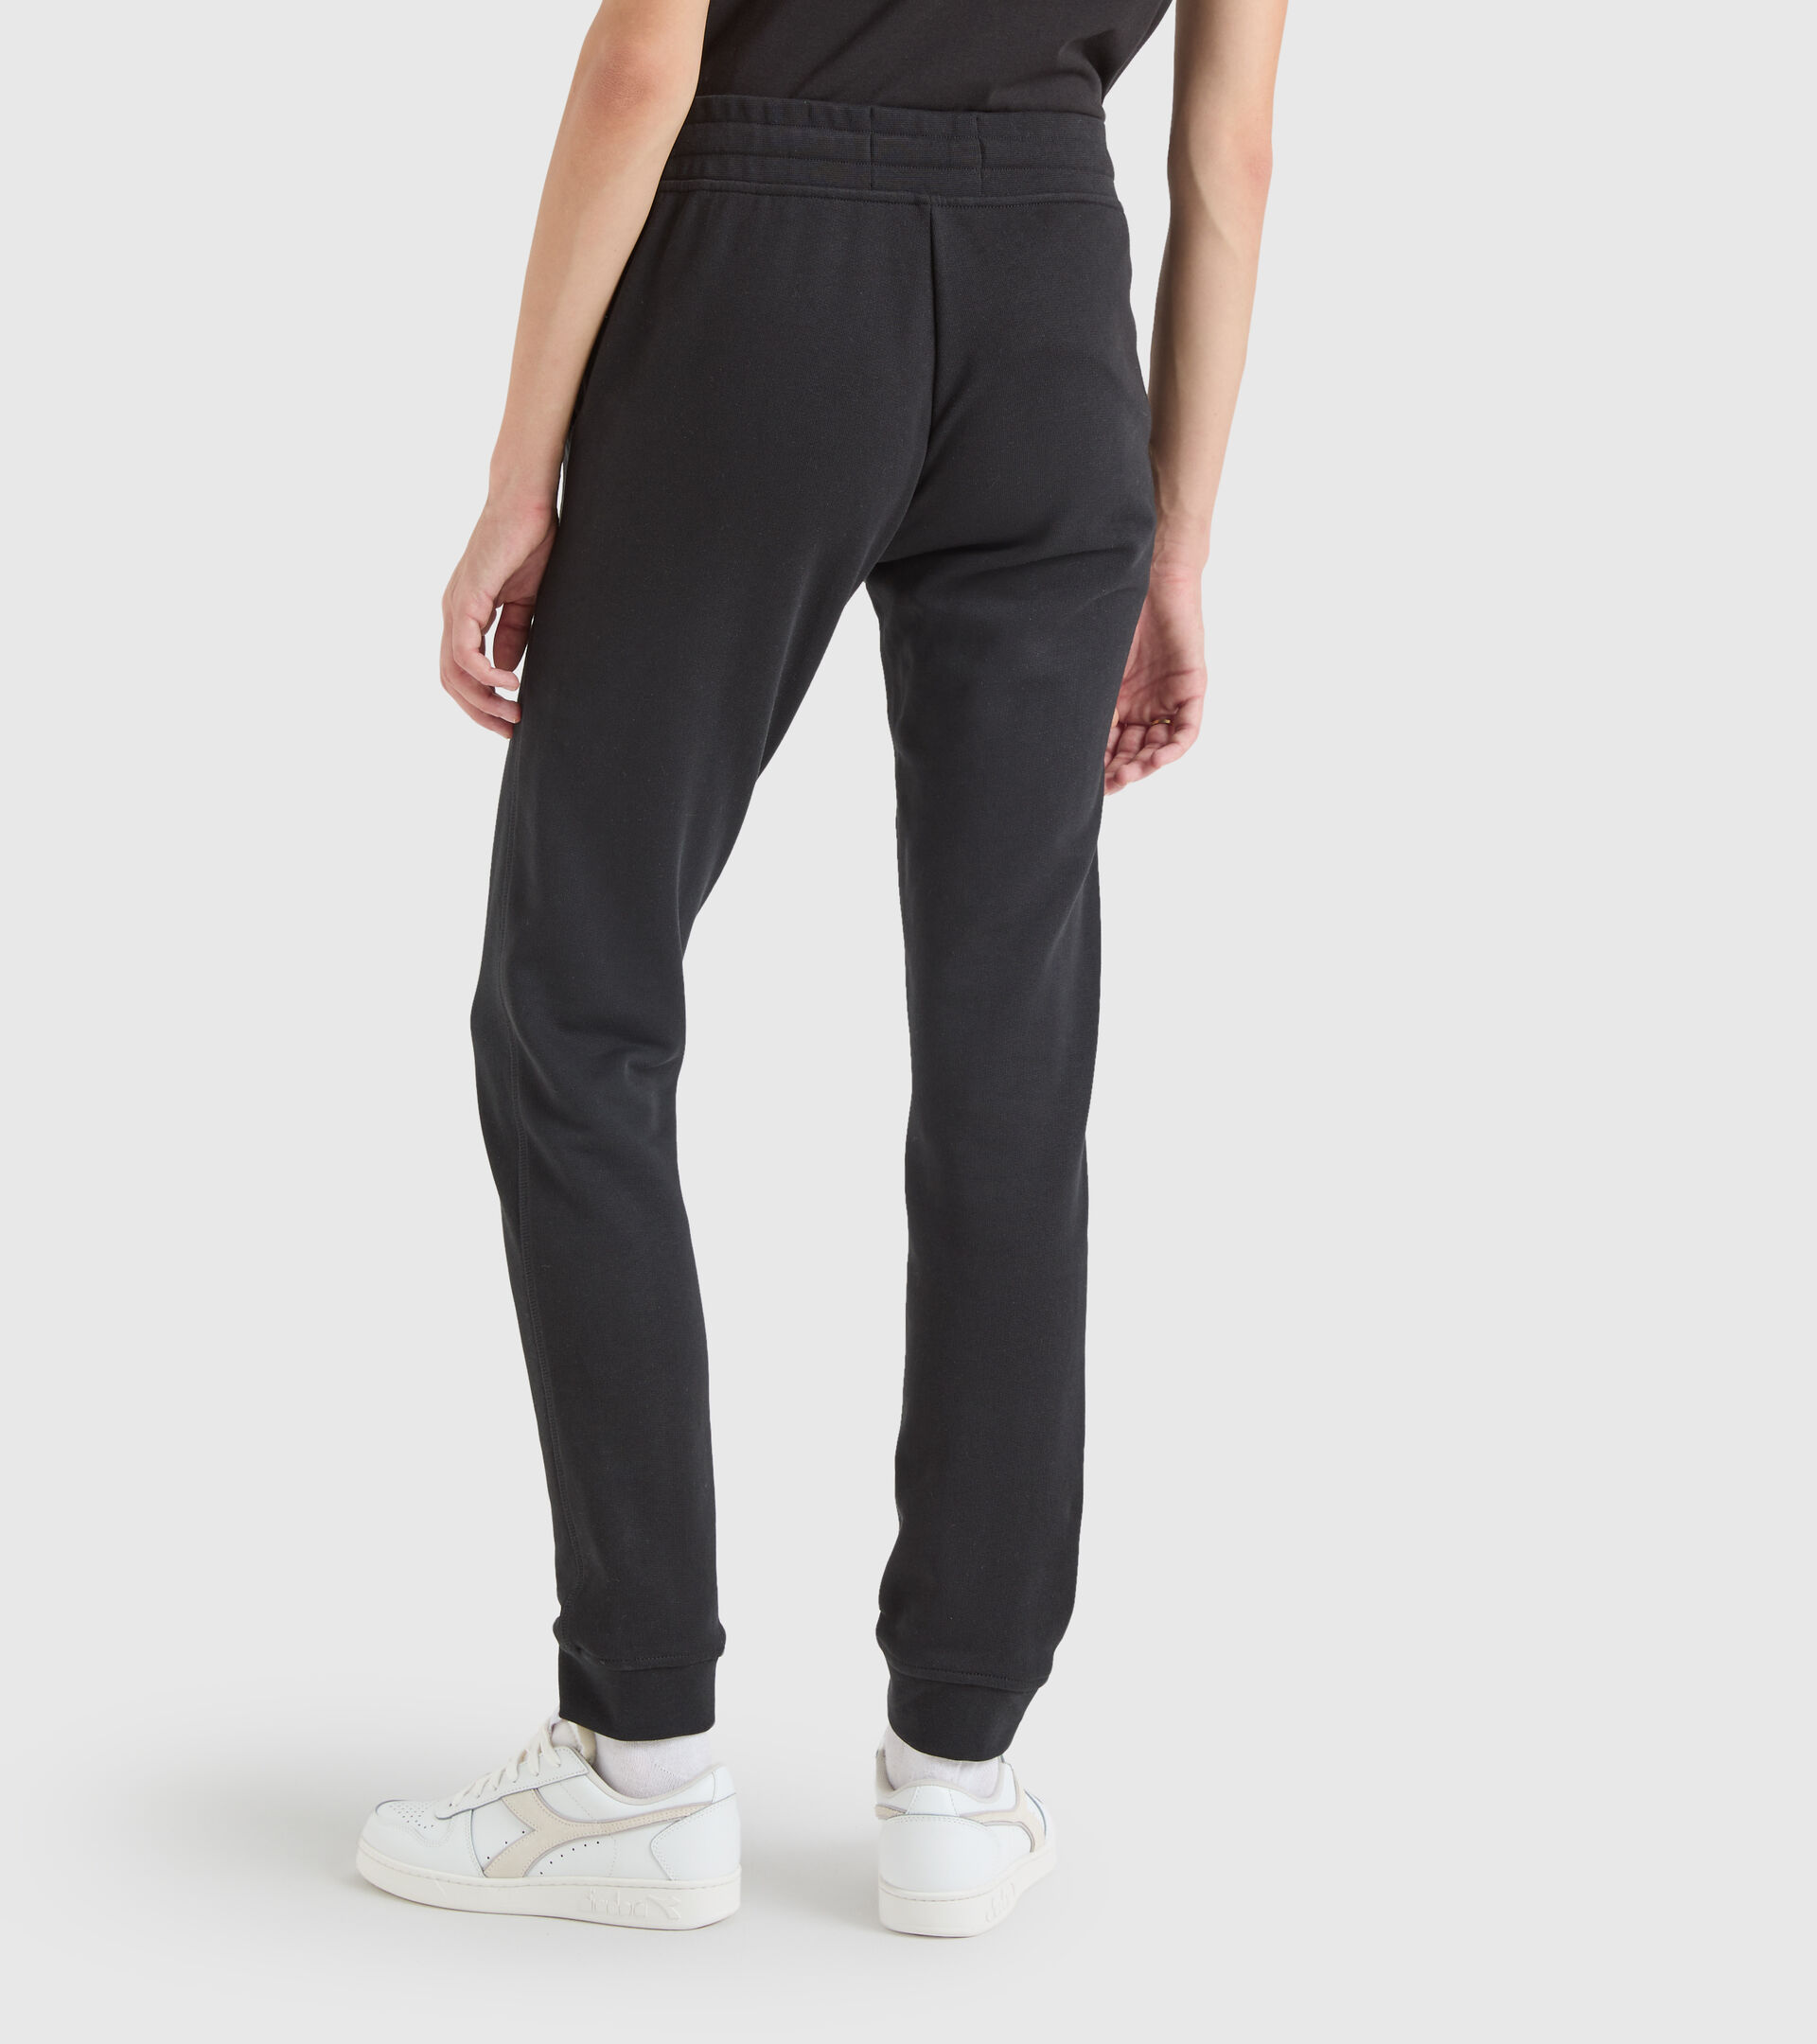 Cotton sports trousers - Made in Italy - Women L. JOGGER PANT MII BLACK - Diadora